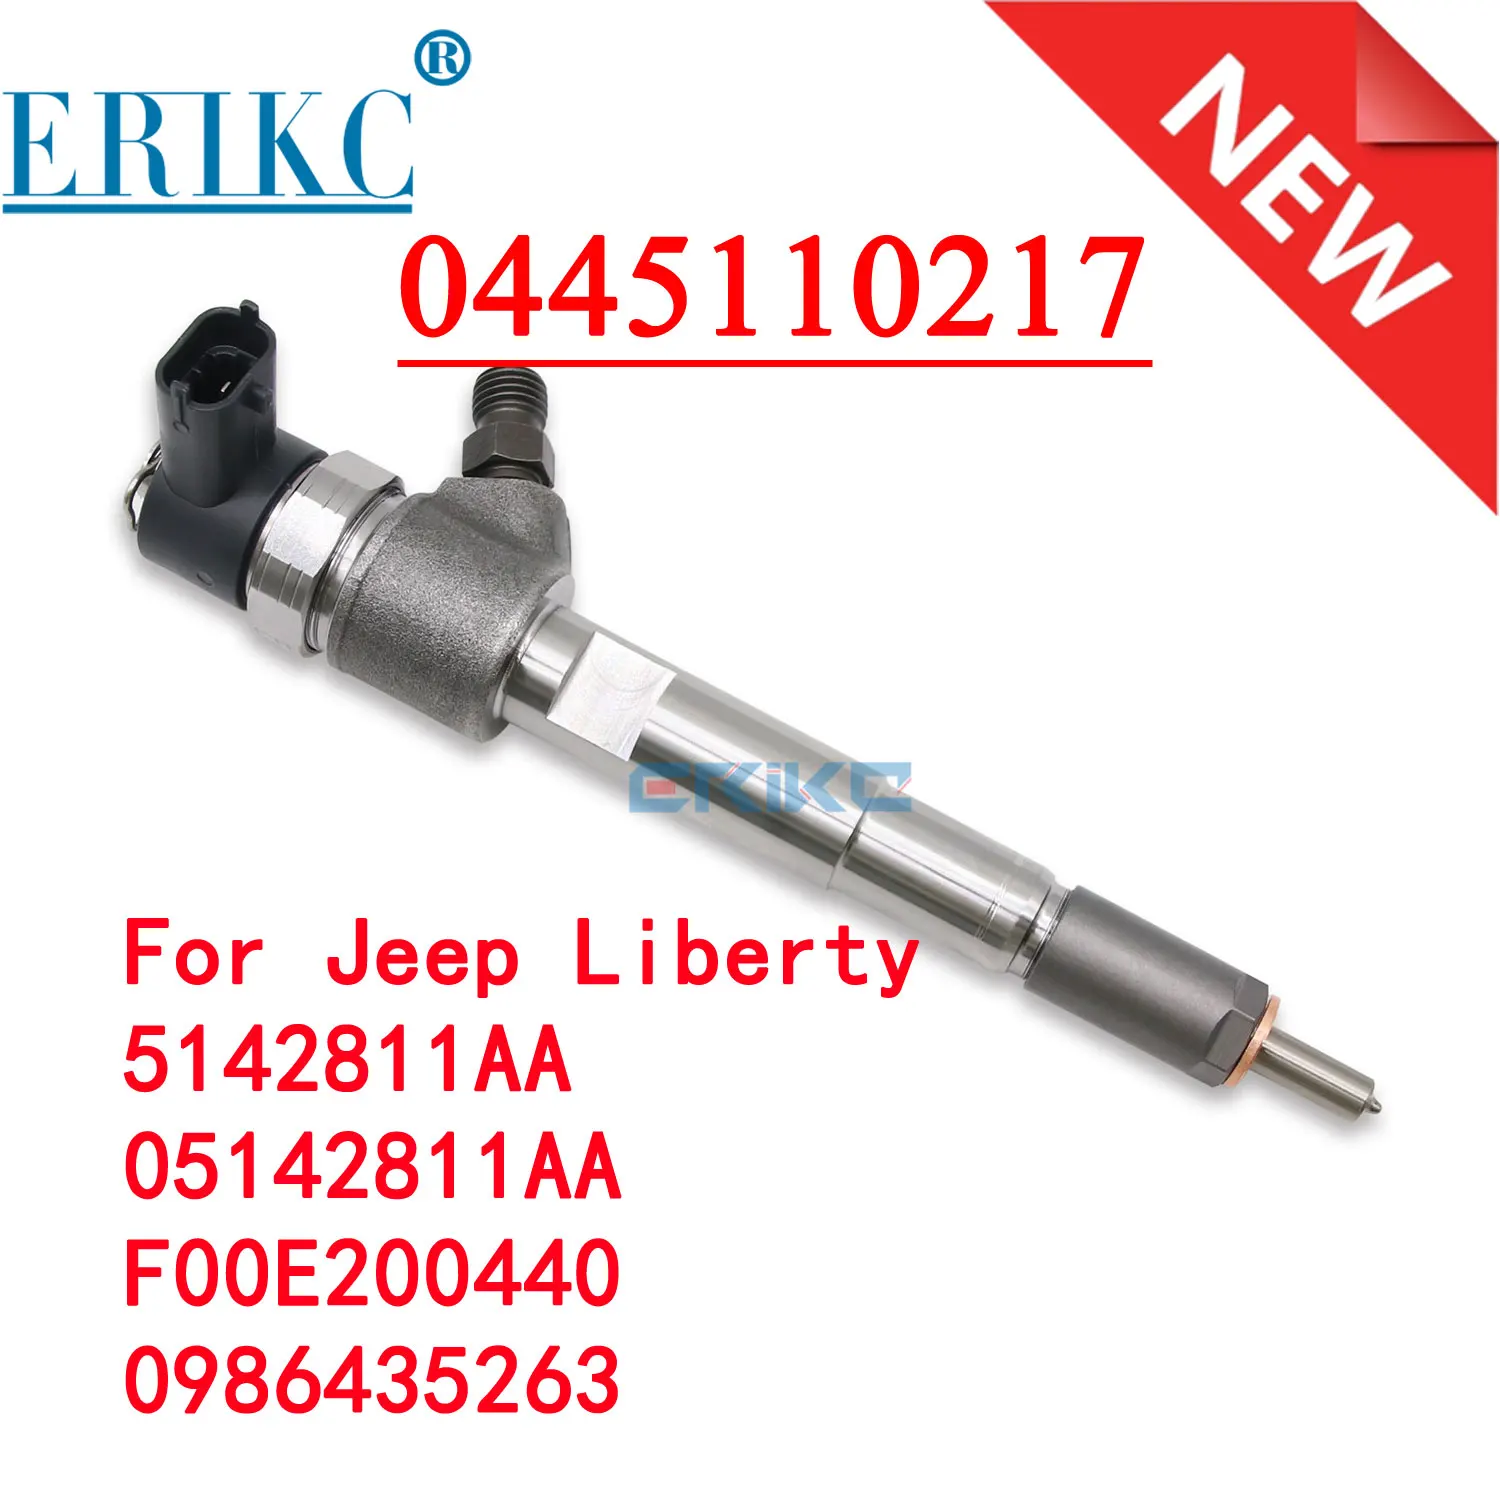 

0445110217 Diesel Fuel Injector 0 445 110 217 for Jeep Liberty CRD 2.8L 2005-2006 5142811AA 05142811AA 0986435263 F00E200440